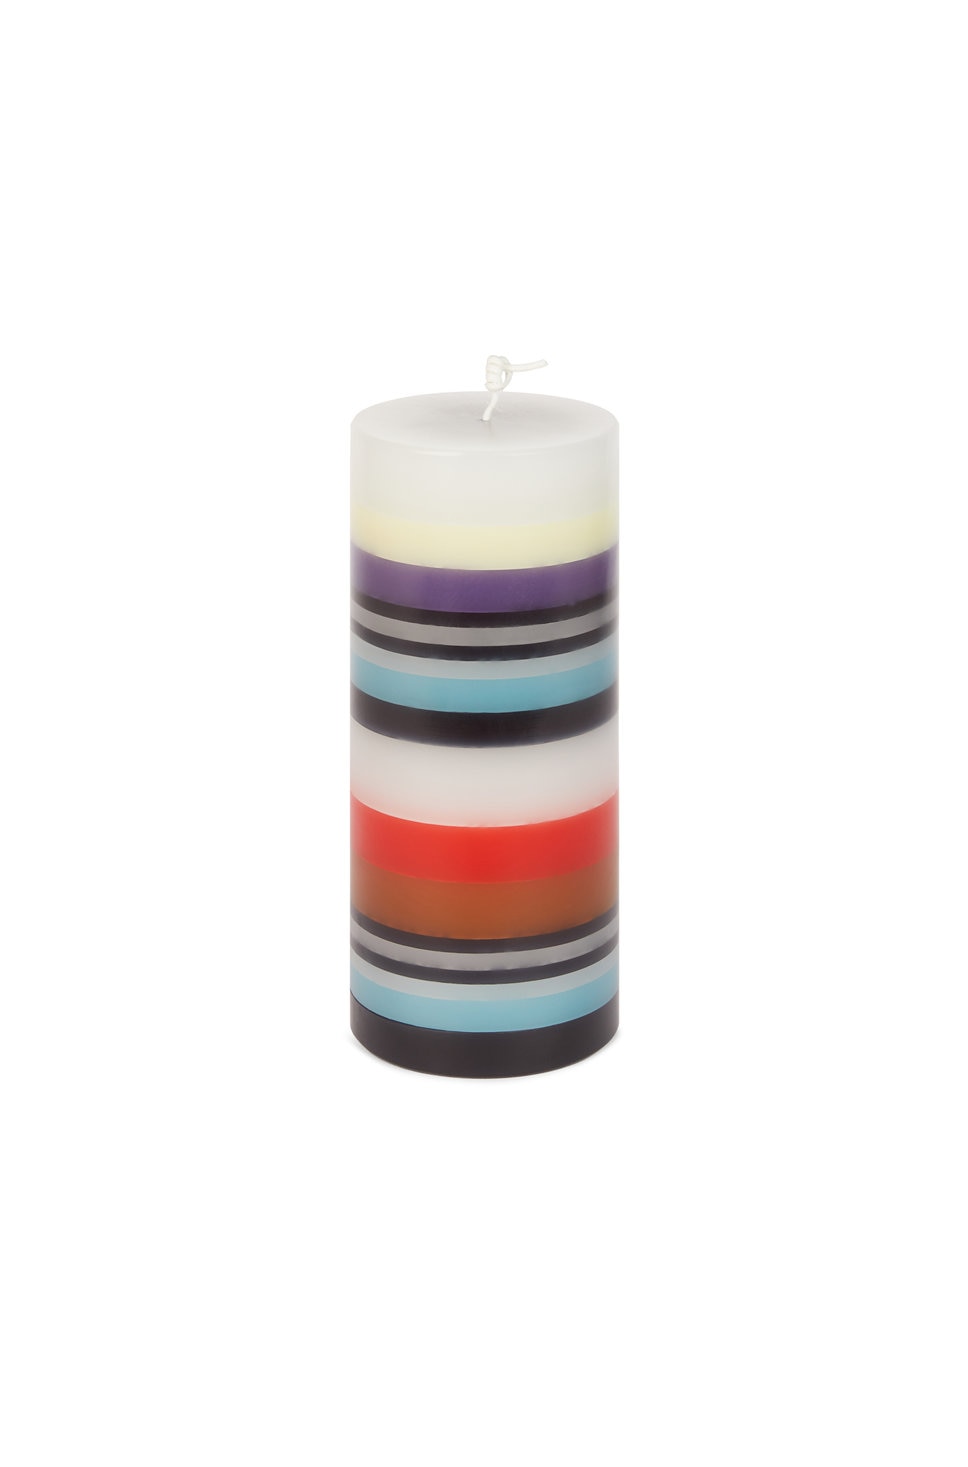 Totem candle 9x24 cm, Red  - 8051275649229 - 0